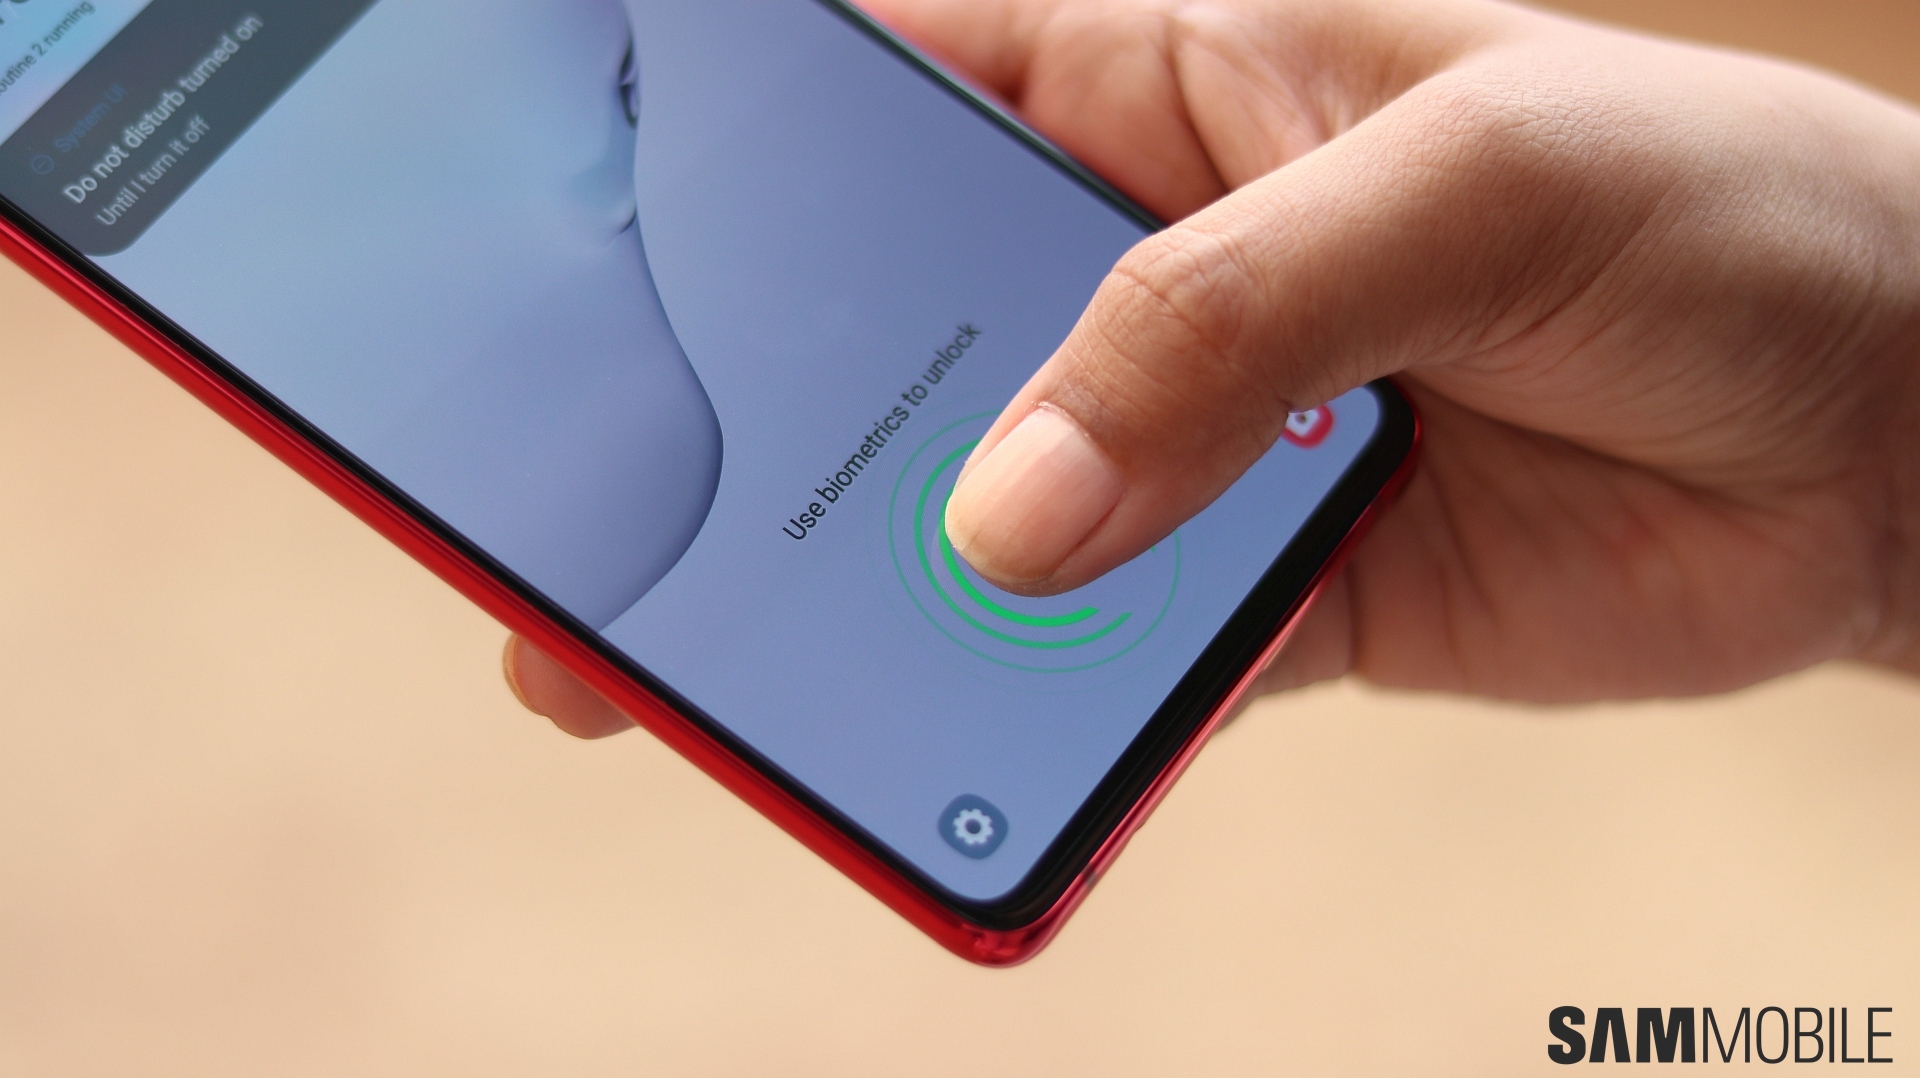 Samsung Galaxy Note10 Lite review: Only for those wanting S Pen on a  budget, others look elsewhere-Tech News , Firstpost